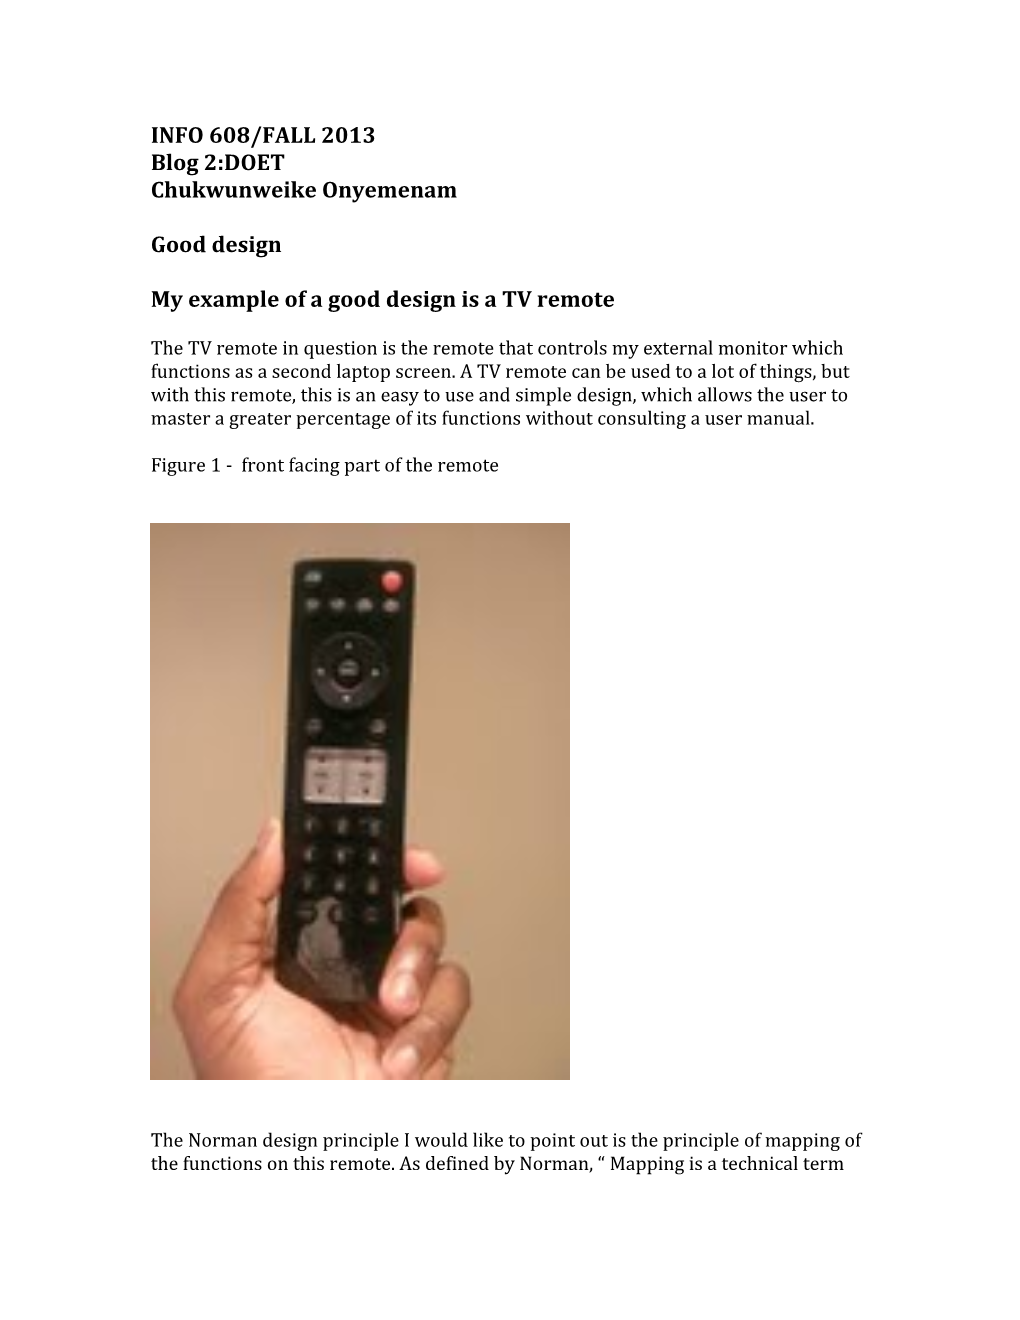 My Example of a Good Design Is a TV Remote